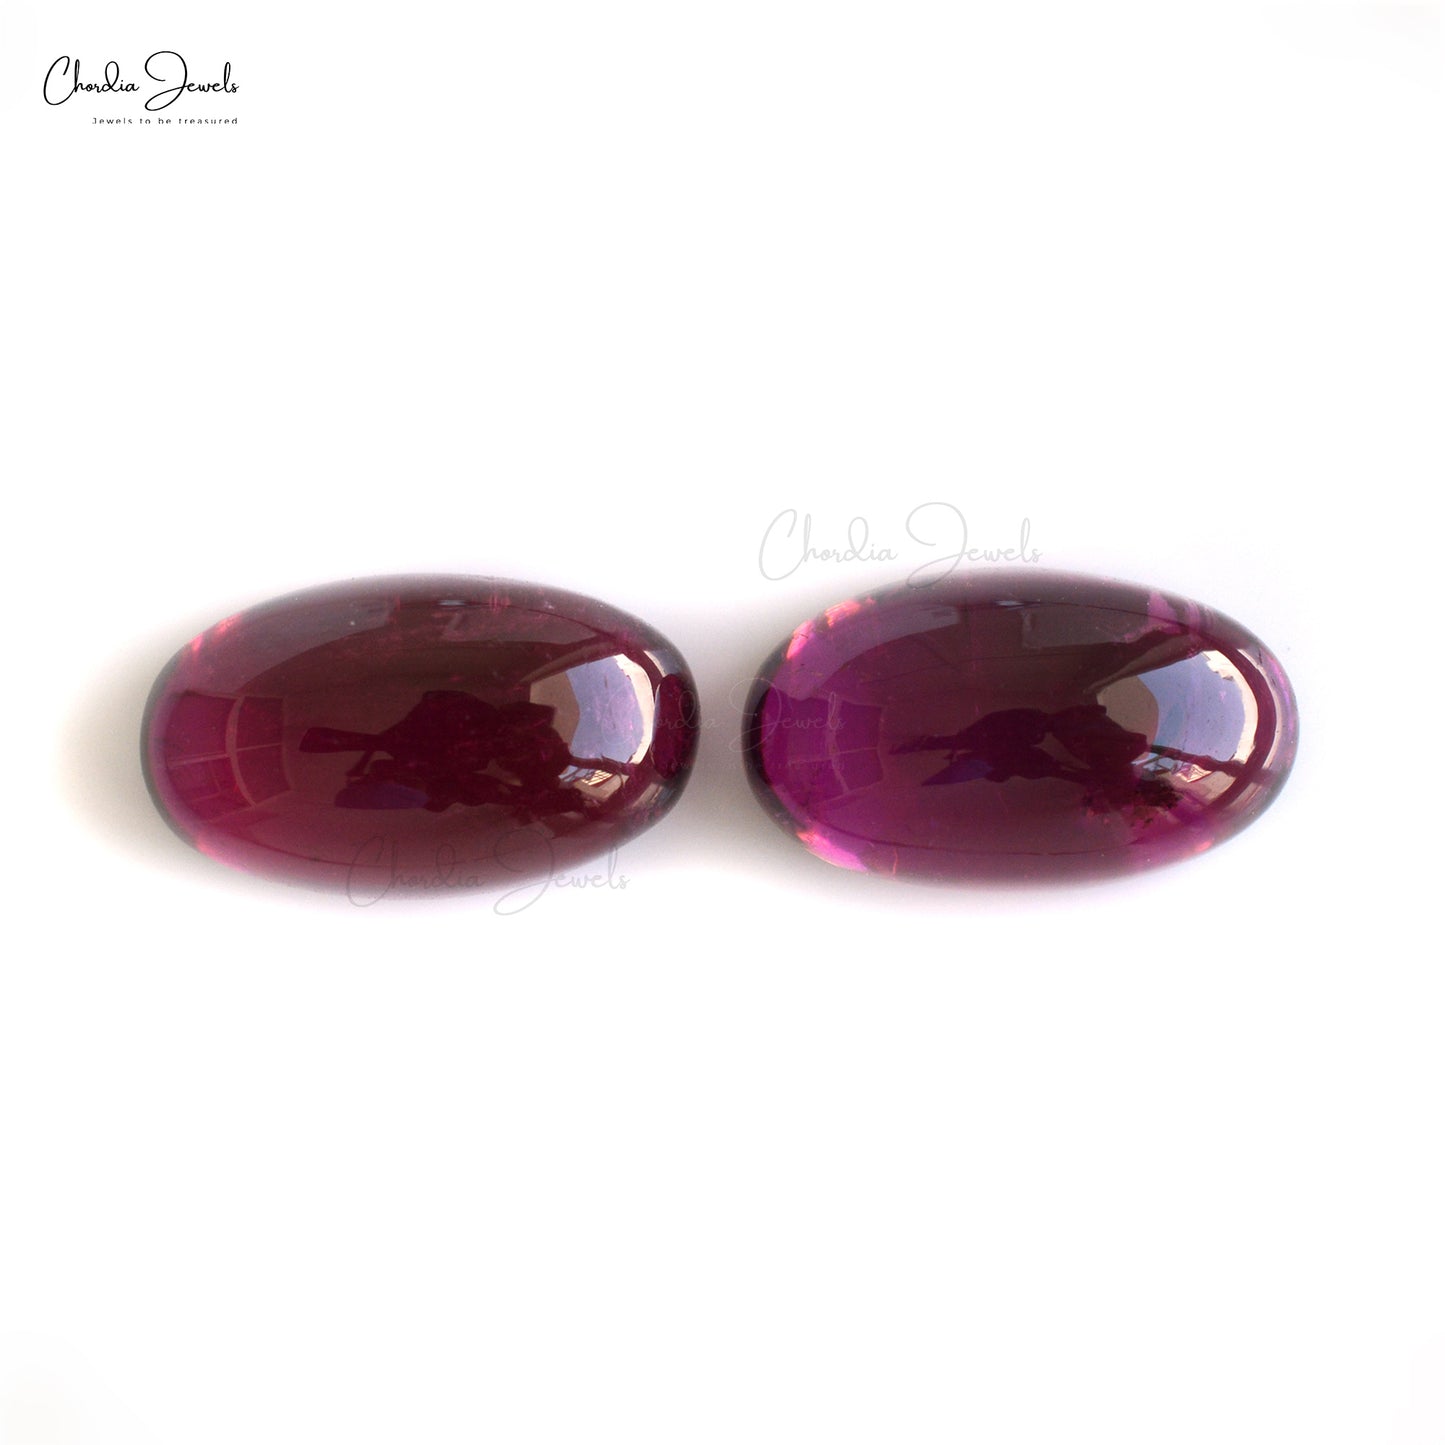 12X7X5MM Oval Cabochon Rubellite Tourmaline Gemstone Wholesaler from India, 2 Piece